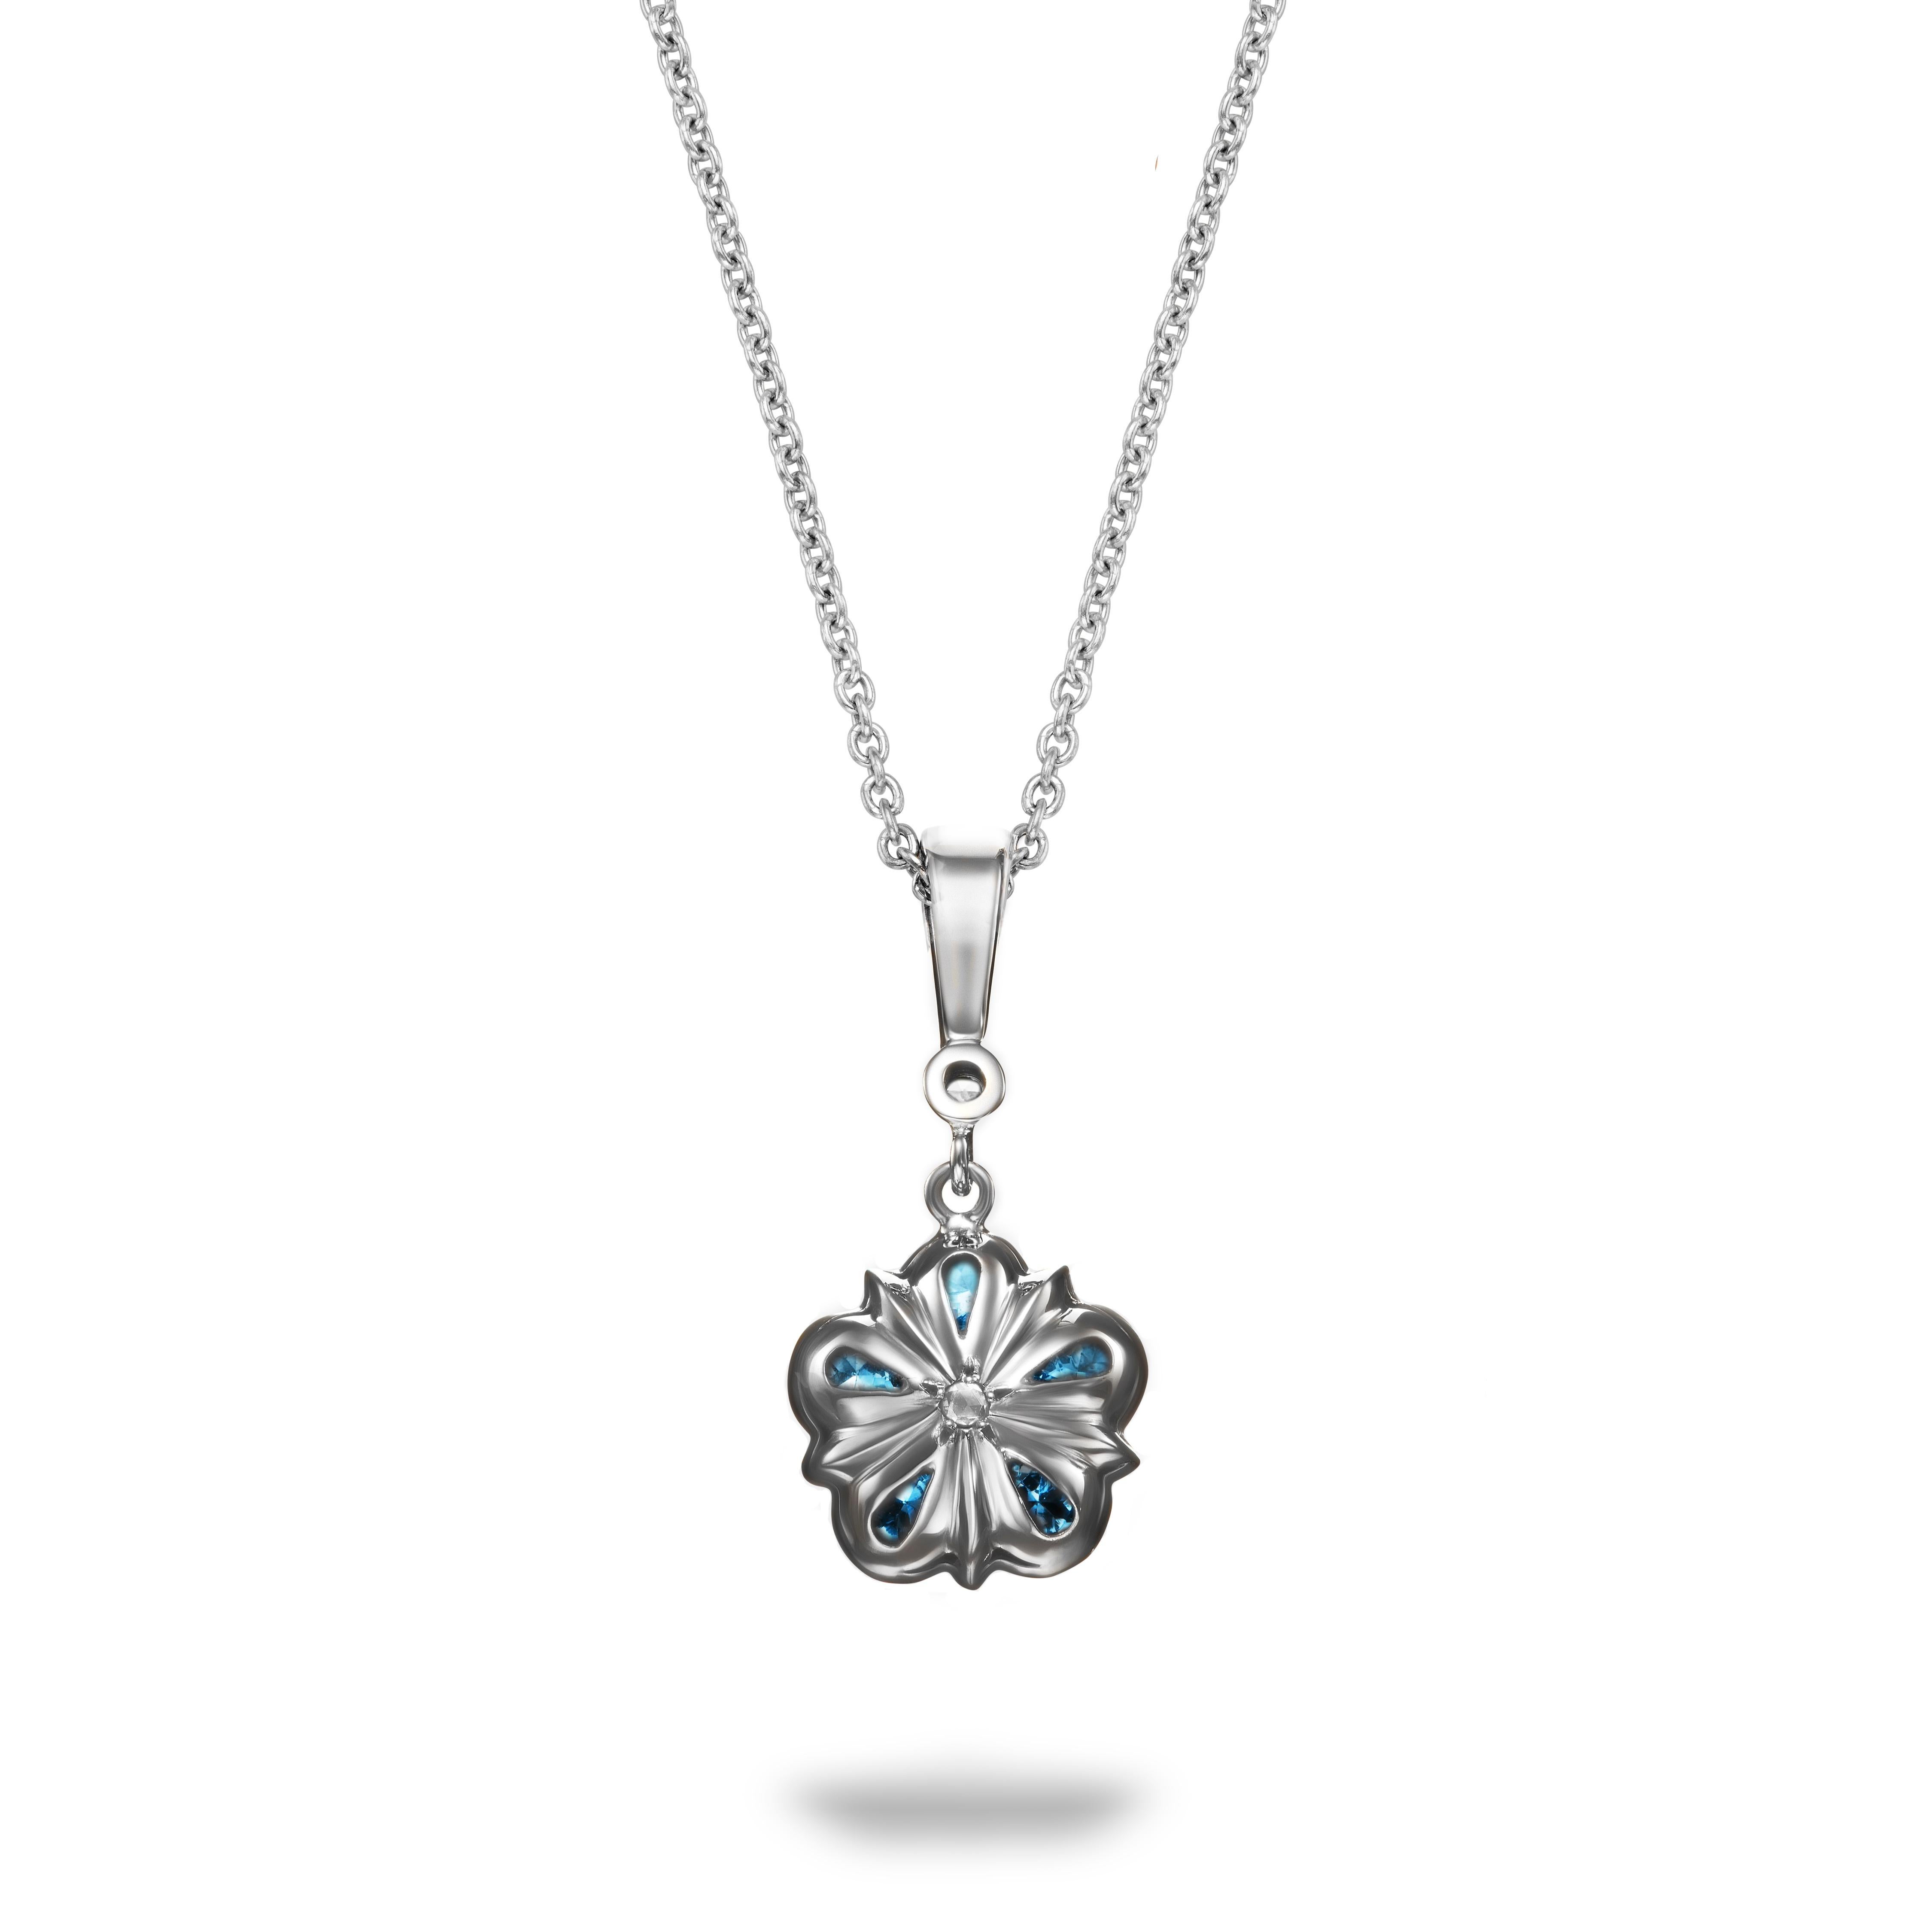 This pretty aquamarine and rose cut diamond Rose pendant features vibrant aquamarines surrounding a rose cut diamond. In true Aril Jewels style, the back of the pendant is just as gorgeous, featuring another tiny rose cut diamond - an extra detail